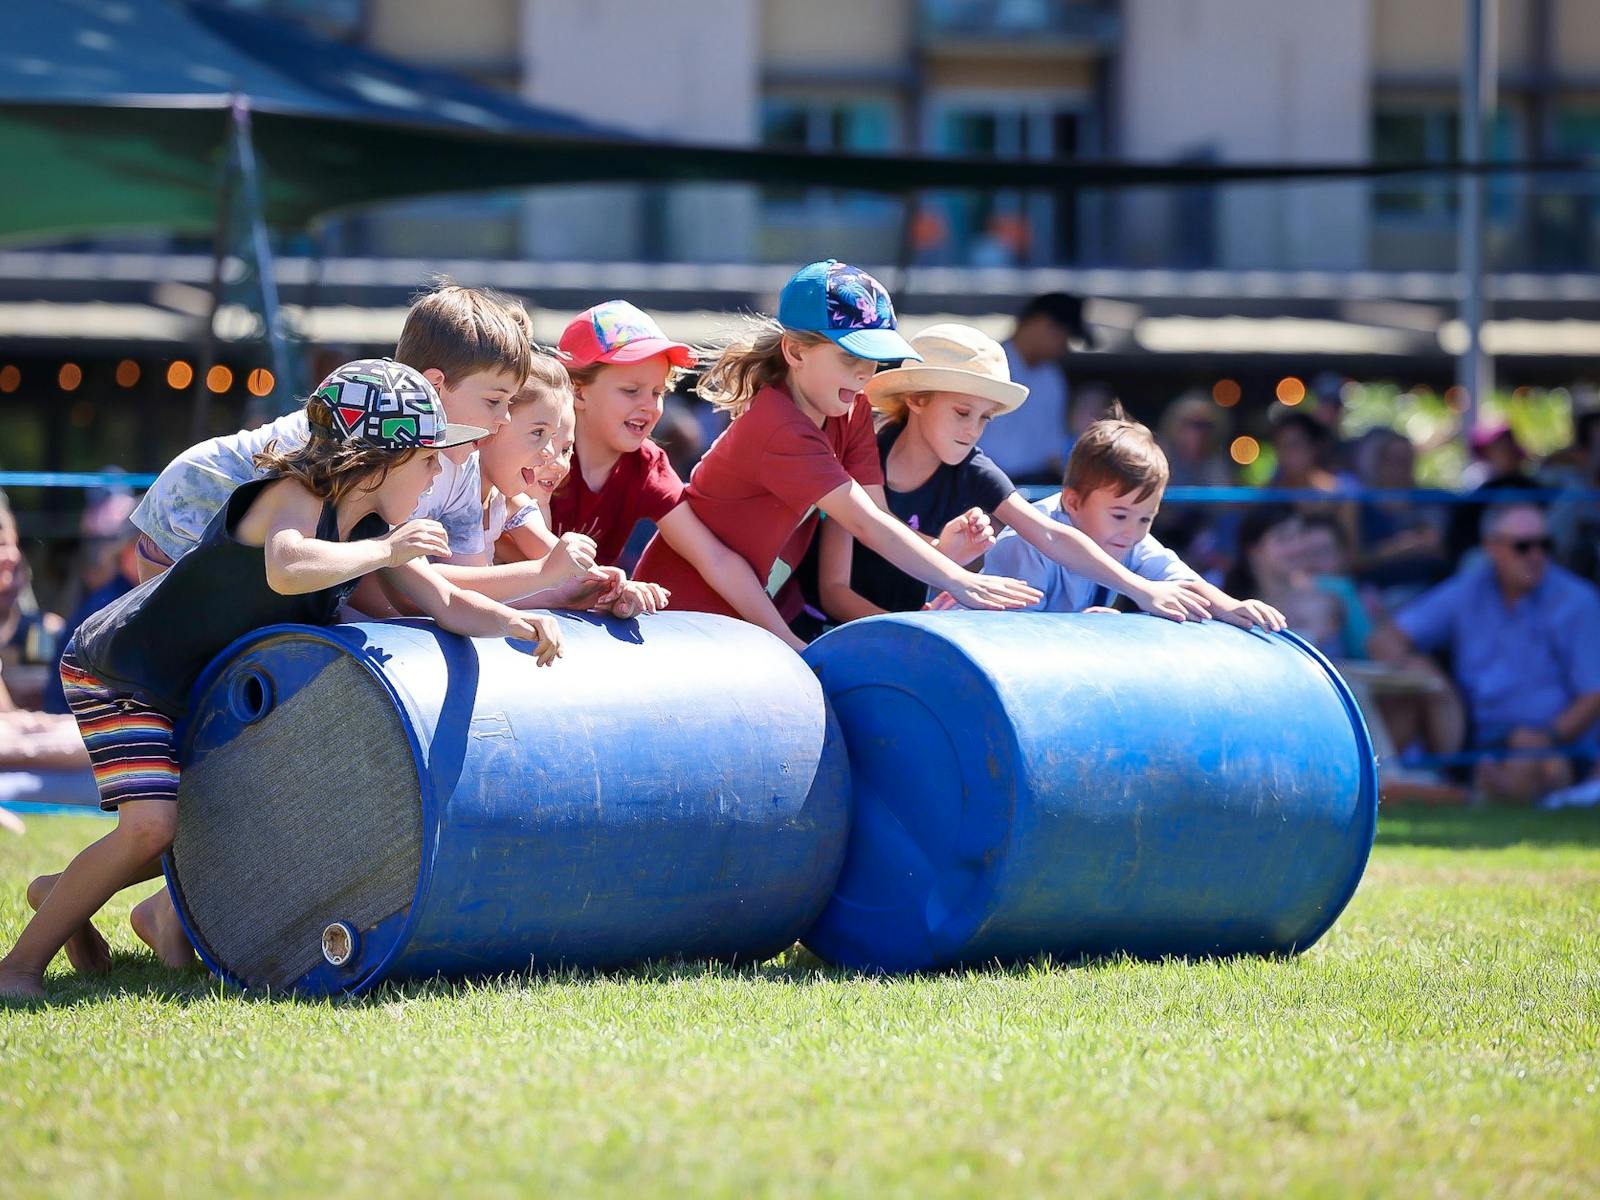 Kids pushing barrels while taking part in the outback show.